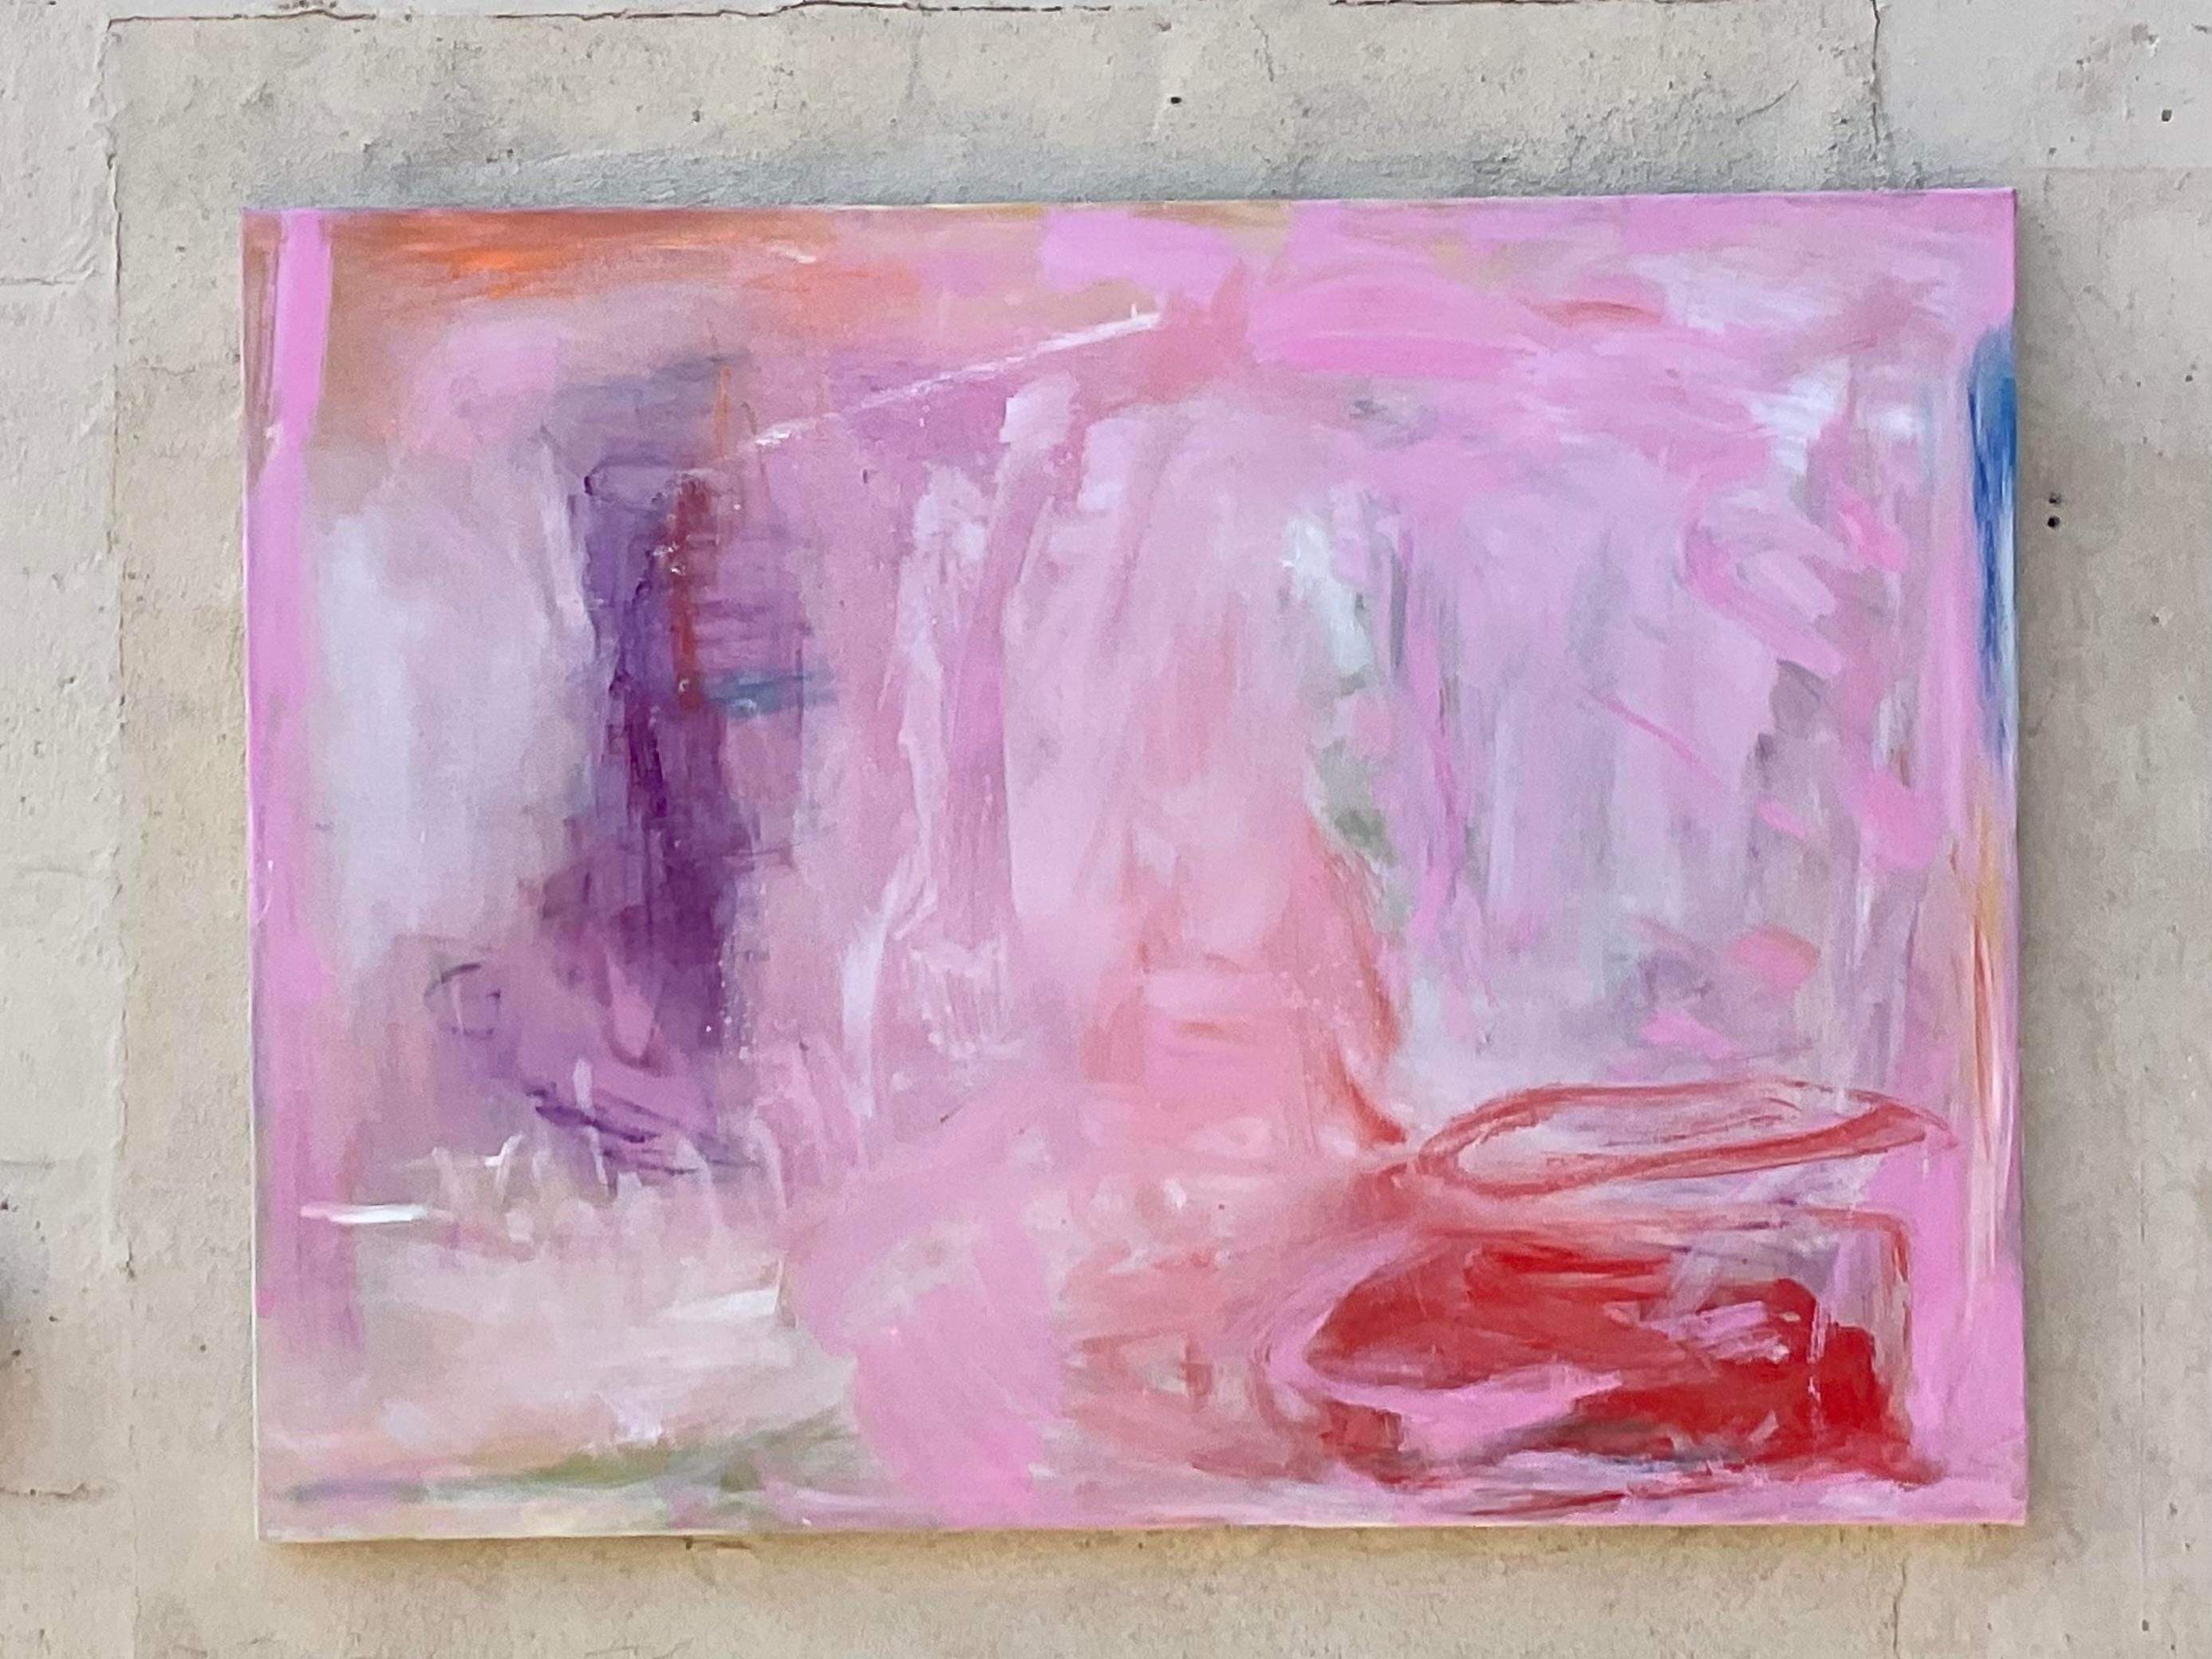 A stunning vintage Boho original oil painting. A chic Abstract composition in brilliant clear colors. Signed and dated by the artist. Acquired from a Palm Beach estate.